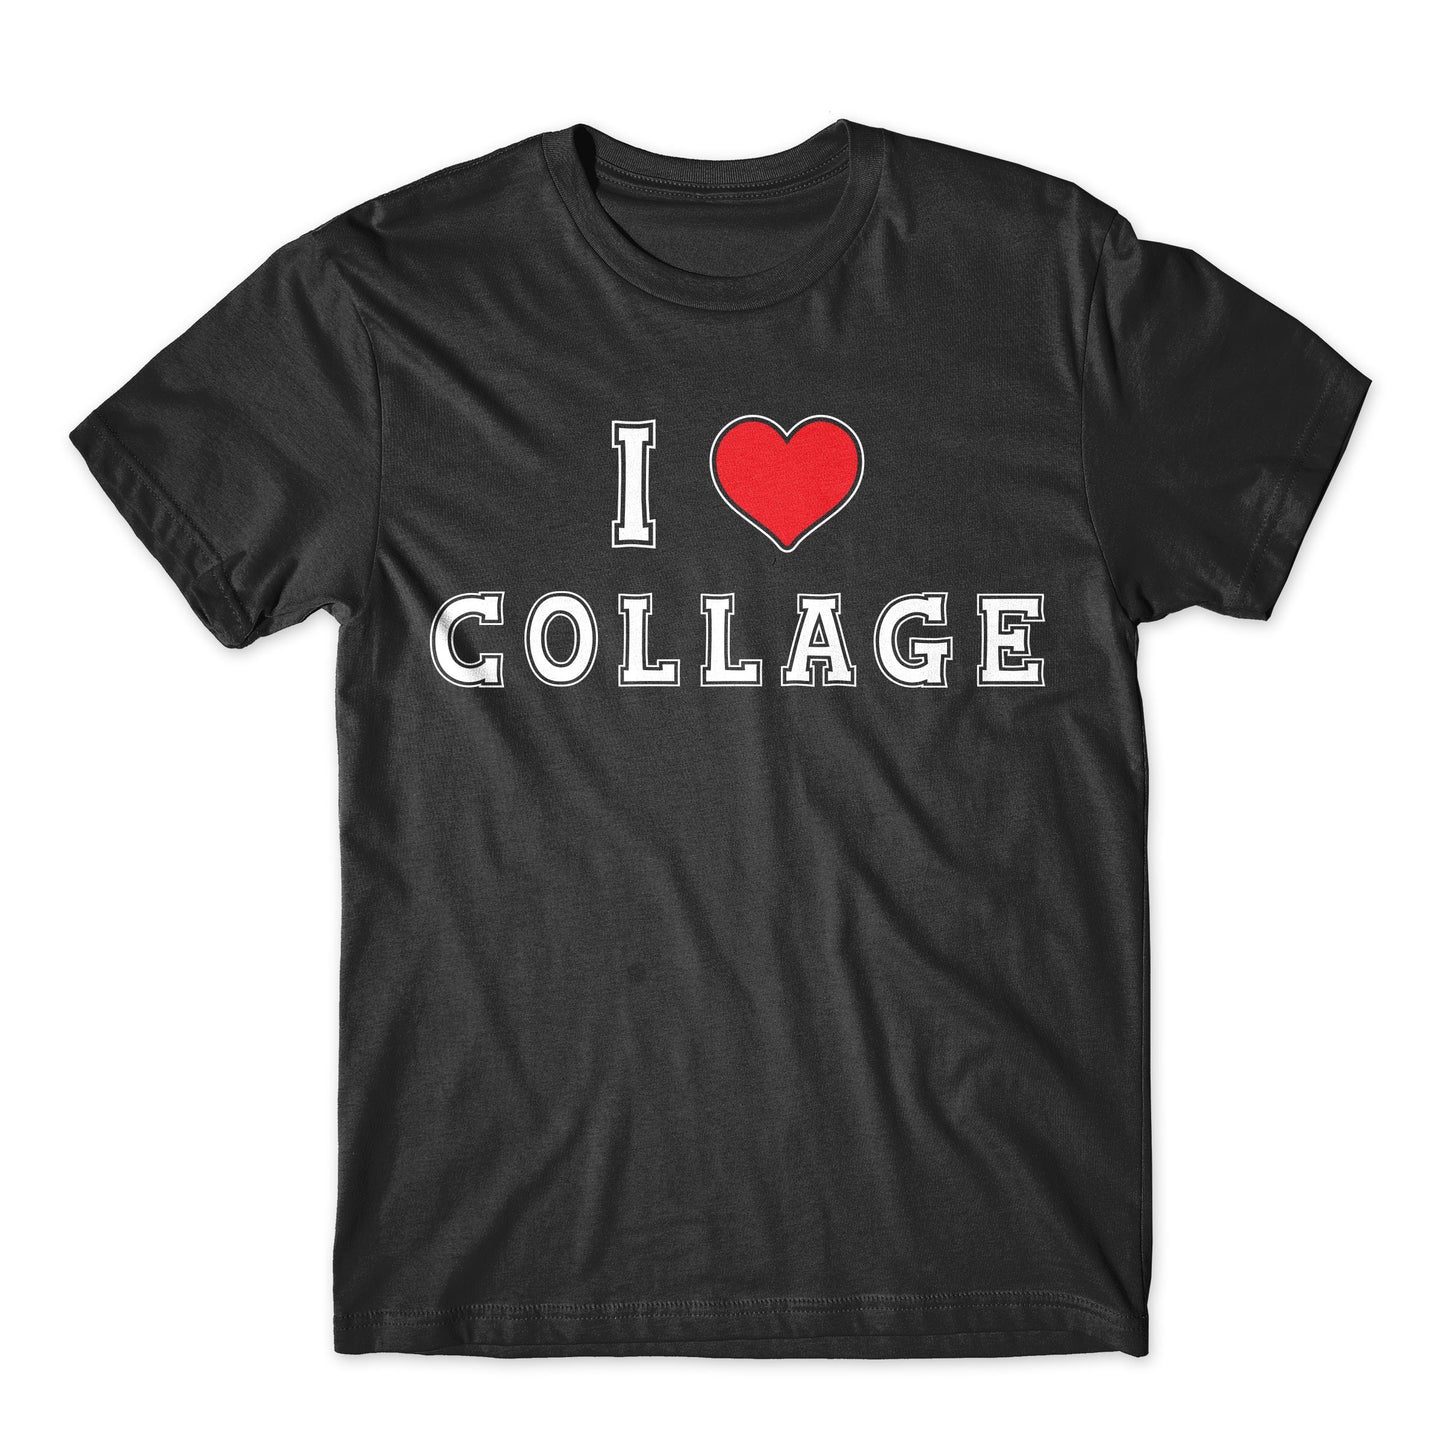 I Love Collage Shirt. On Black, White, or Gray Soft Cotton  Premium Shirt. Funny College Tee. Comfy!